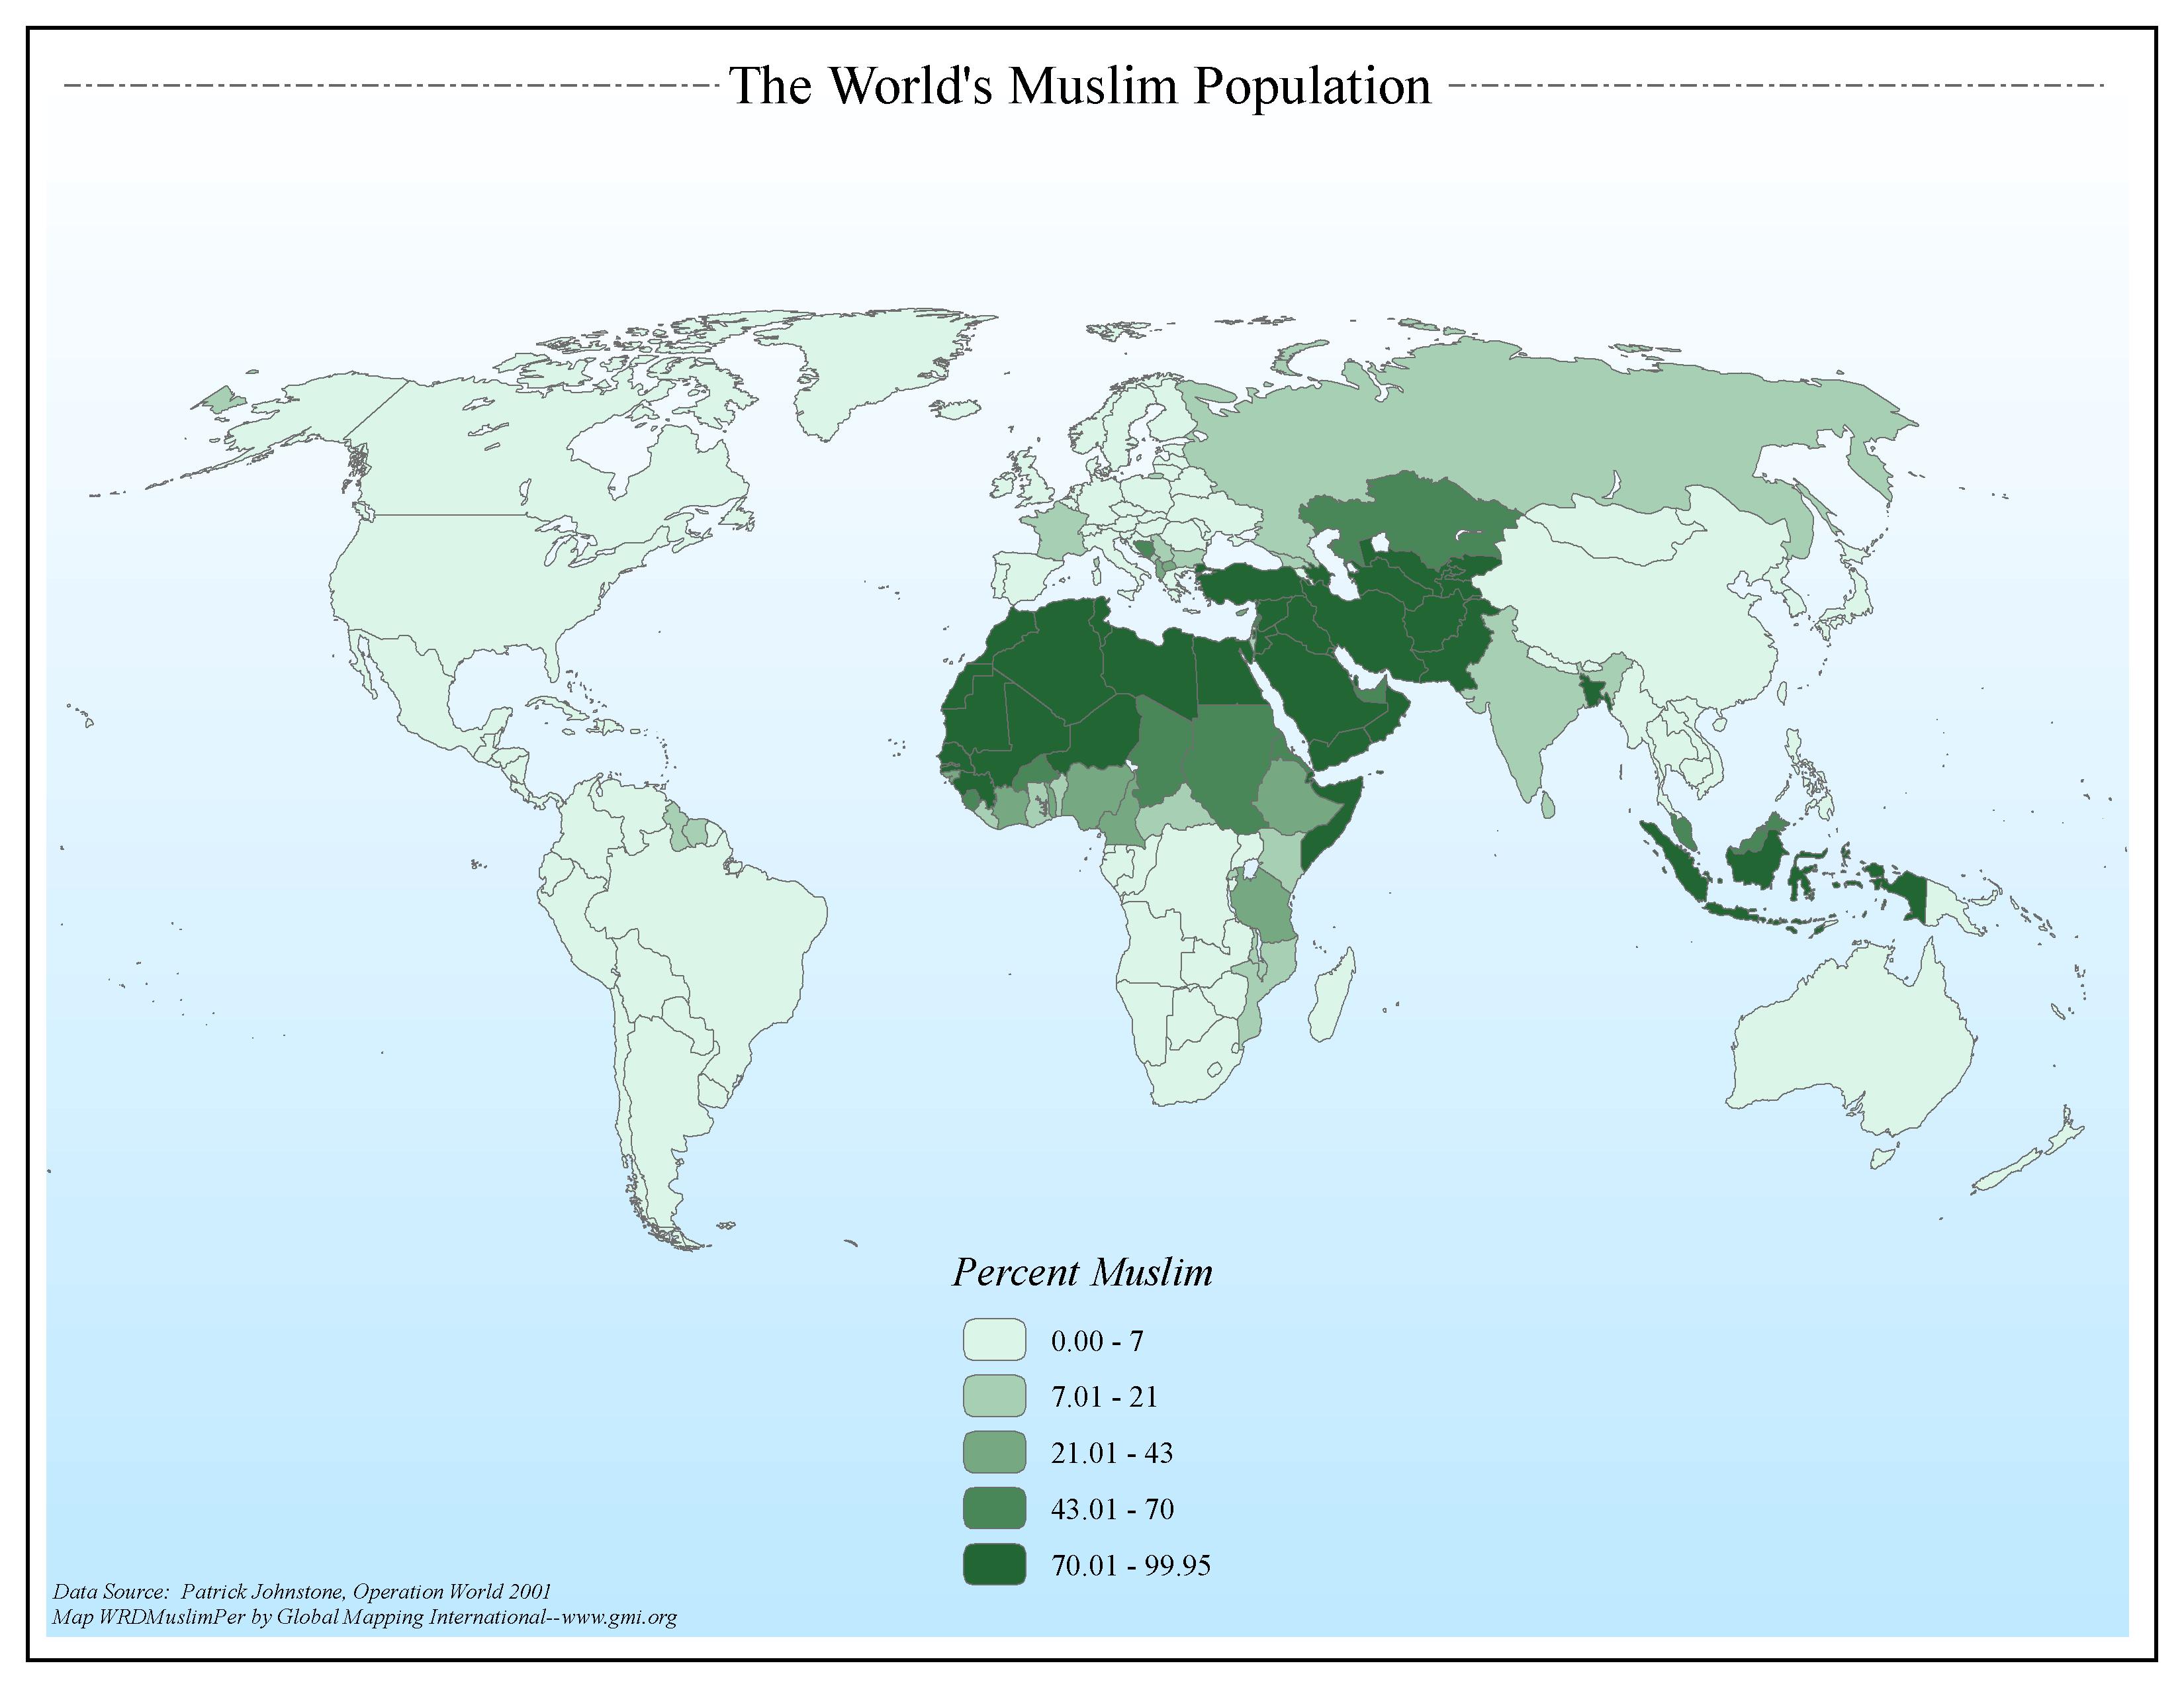 The World's Muslim Population (by percent)